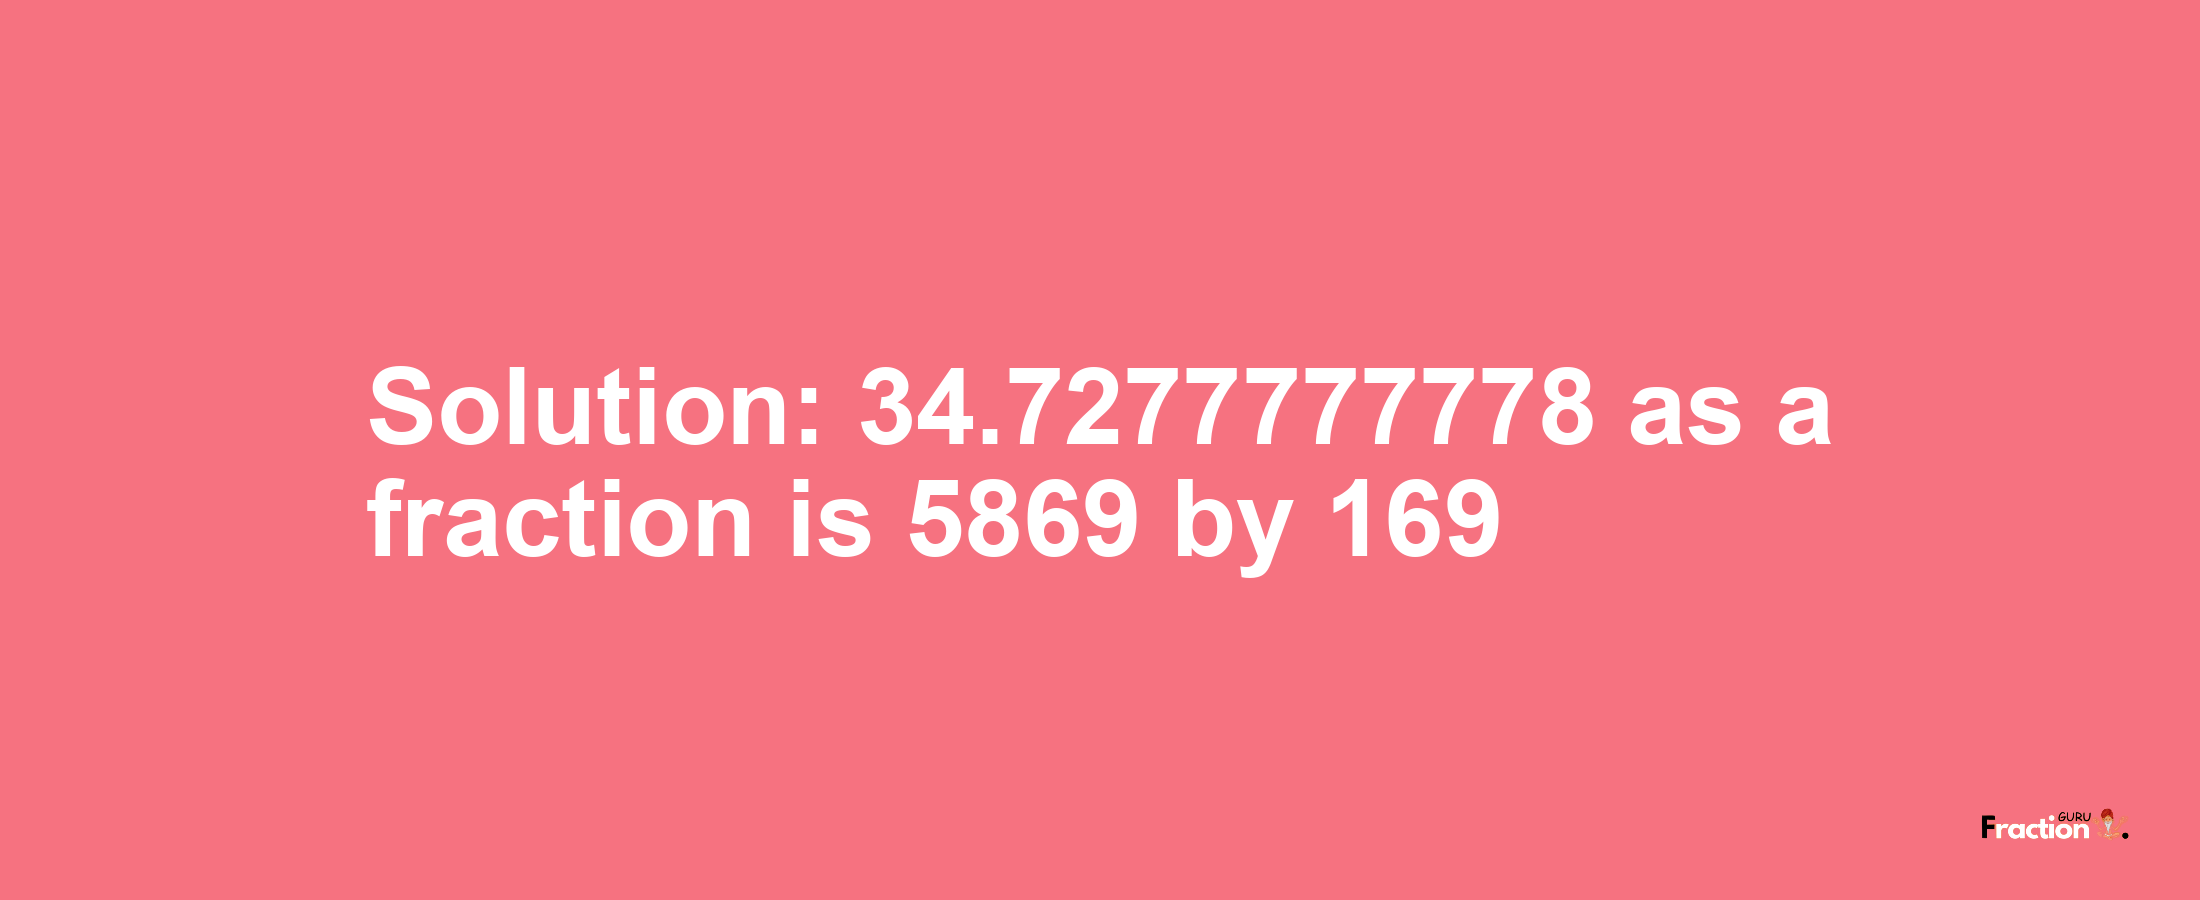 Solution:34.7277777778 as a fraction is 5869/169